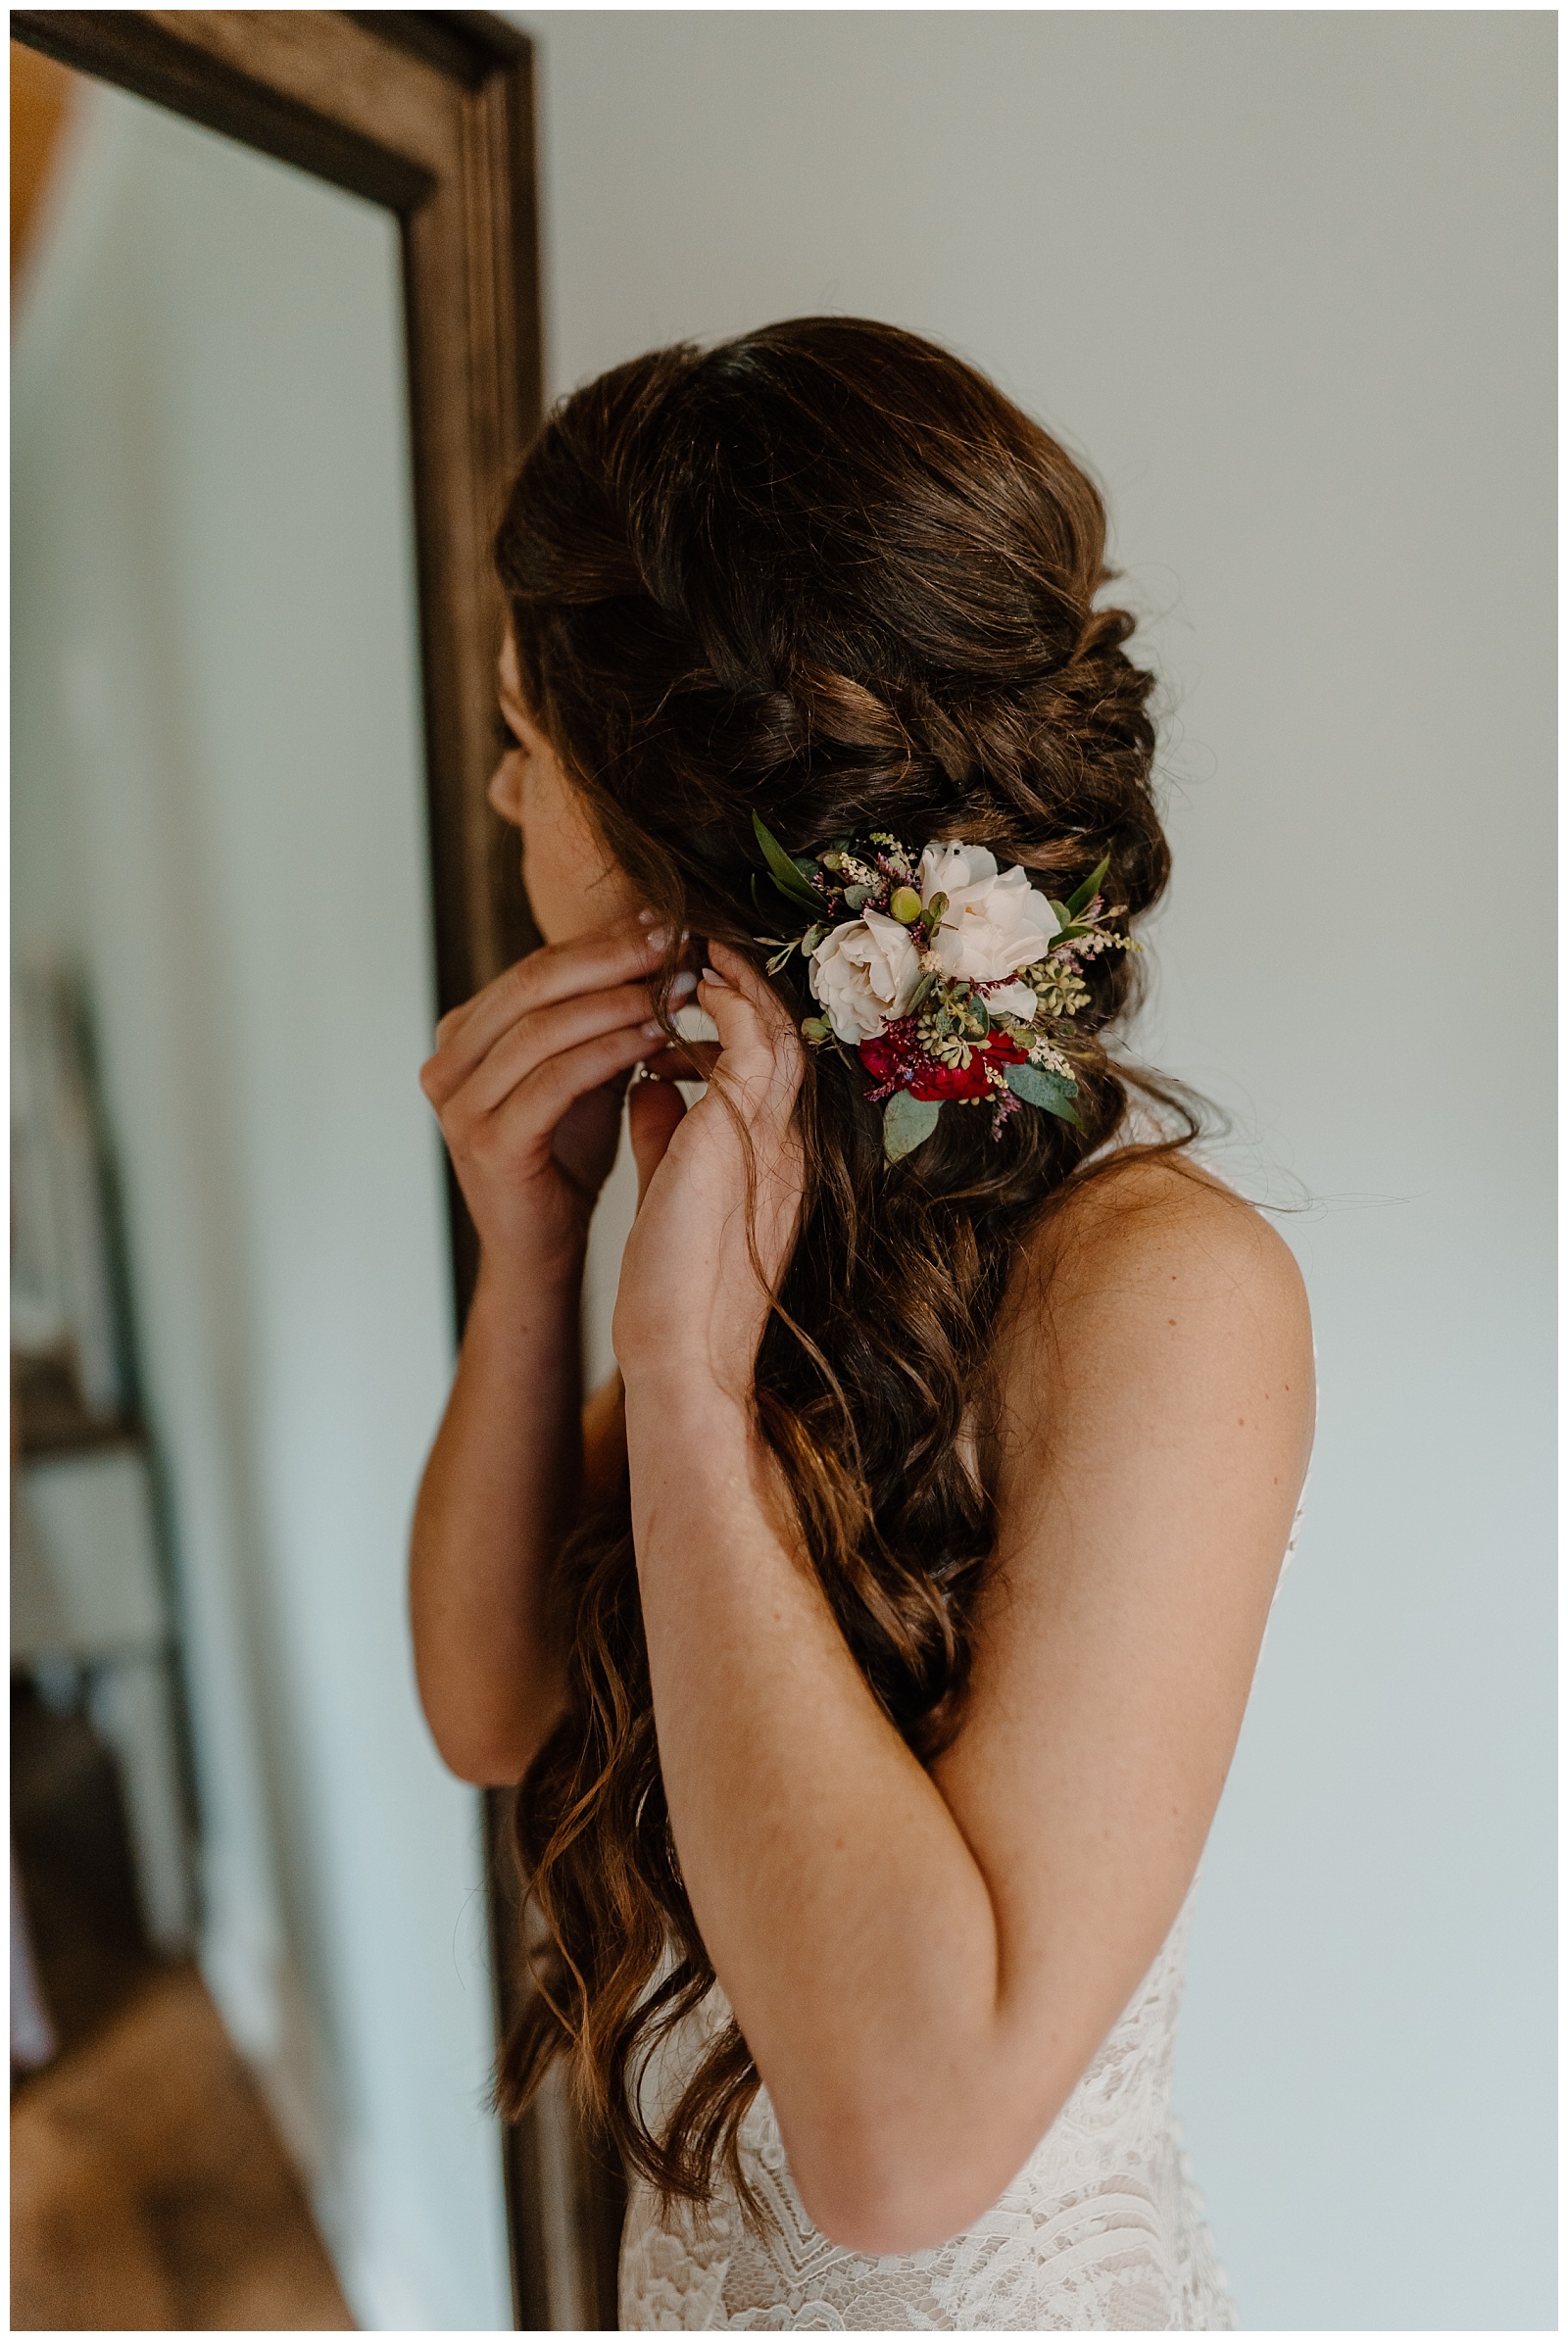 Bride with long braided hair style and matching flowers in her hair is putting on her earrings and looking in the mirror.